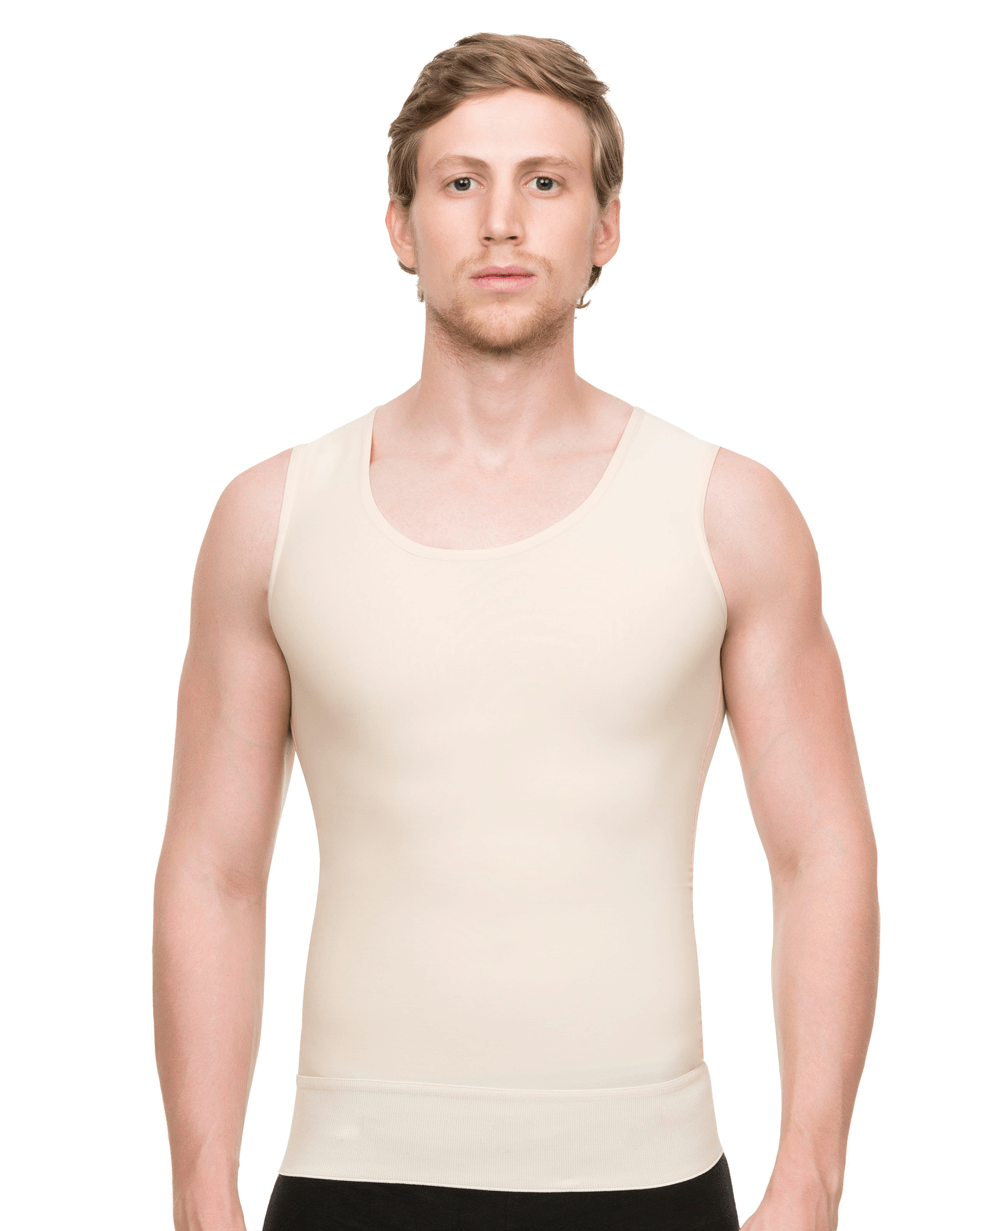 https://cdn.shopify.com/s/files/1/0585/3092/2695/products/Isavela_Compression_Garments_Fajas_PlasticSurgery_RecoveryGarment_bodycontour_postsurgical_support_2nd_stage_male_abdominal_cosmetic_surgery_compression_vest_with_3_elastic_waist_band.png?v=1683247984&width=1000